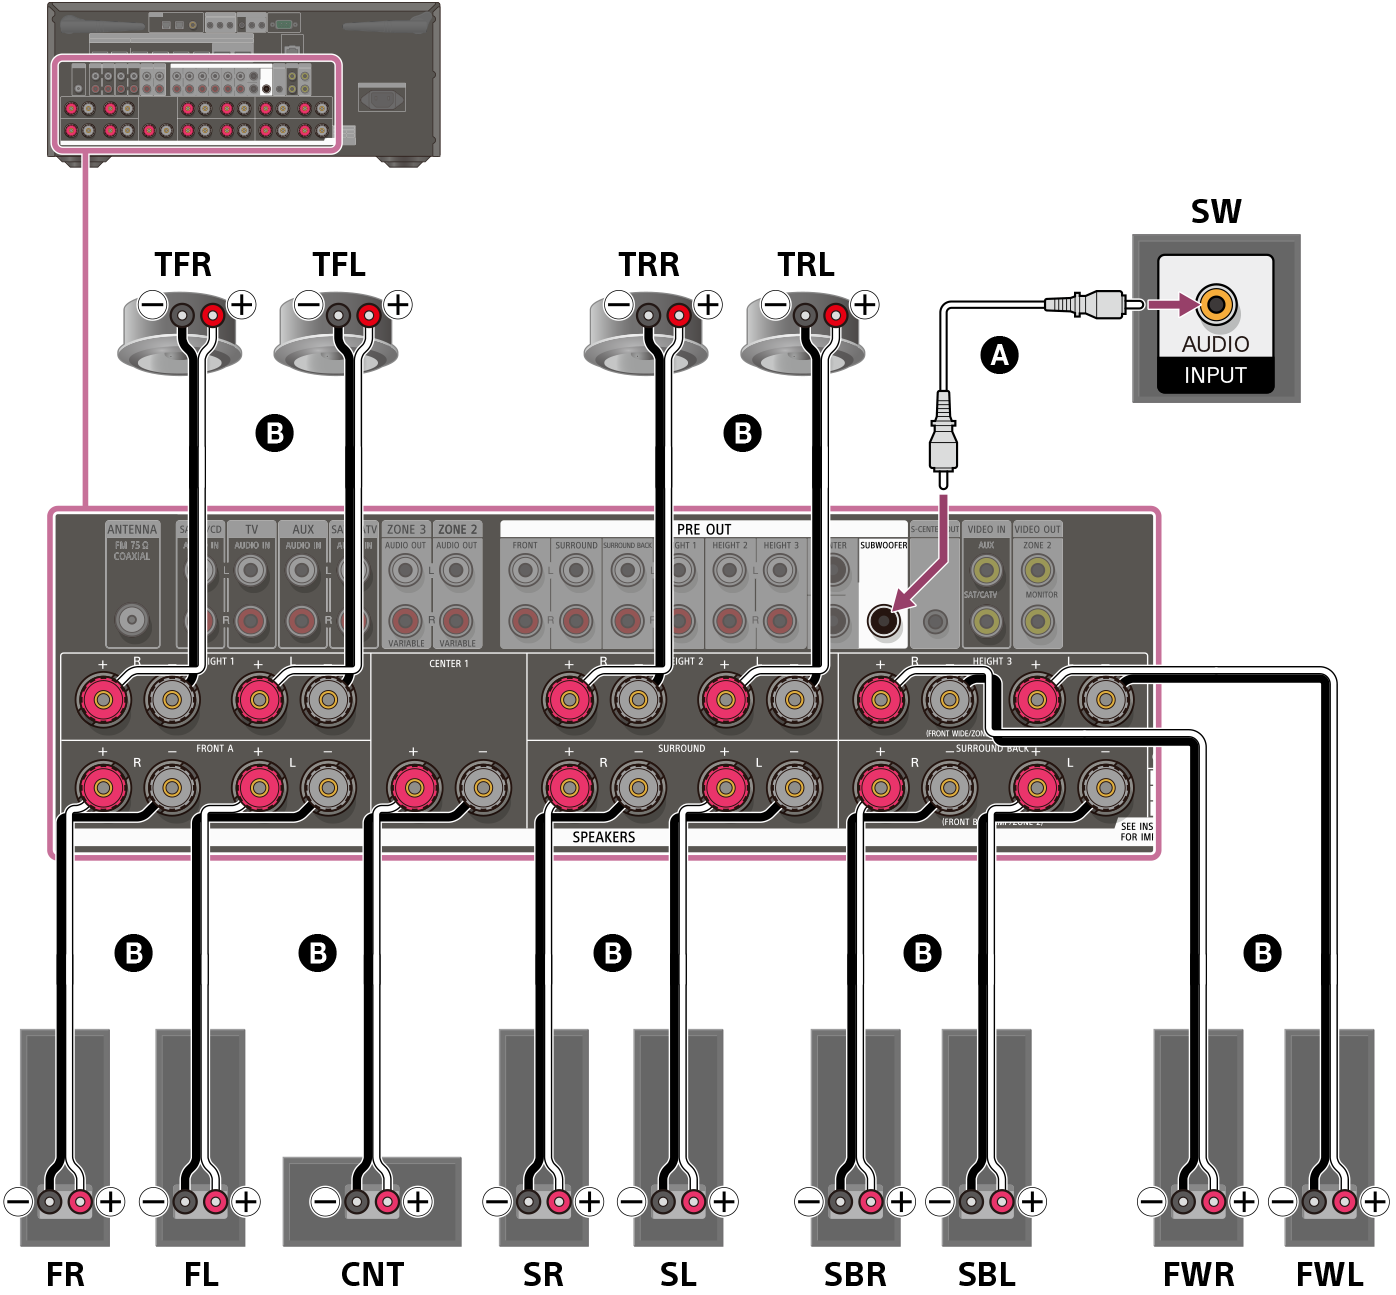 Illustration of connecting each speaker to the speaker terminals on the rear of the receiver. Connect the left and right front speakers, left and right front wide speakers, left and right surround speakers, center speaker, left and right surround back speakers, left and right top front speakers, and left and right top rear speakers to their respective speaker terminals using speaker cables (not supplied). Connect the subwoofer to the SUBWOOFER OUT terminal with a monaural audio cable (not supplied).